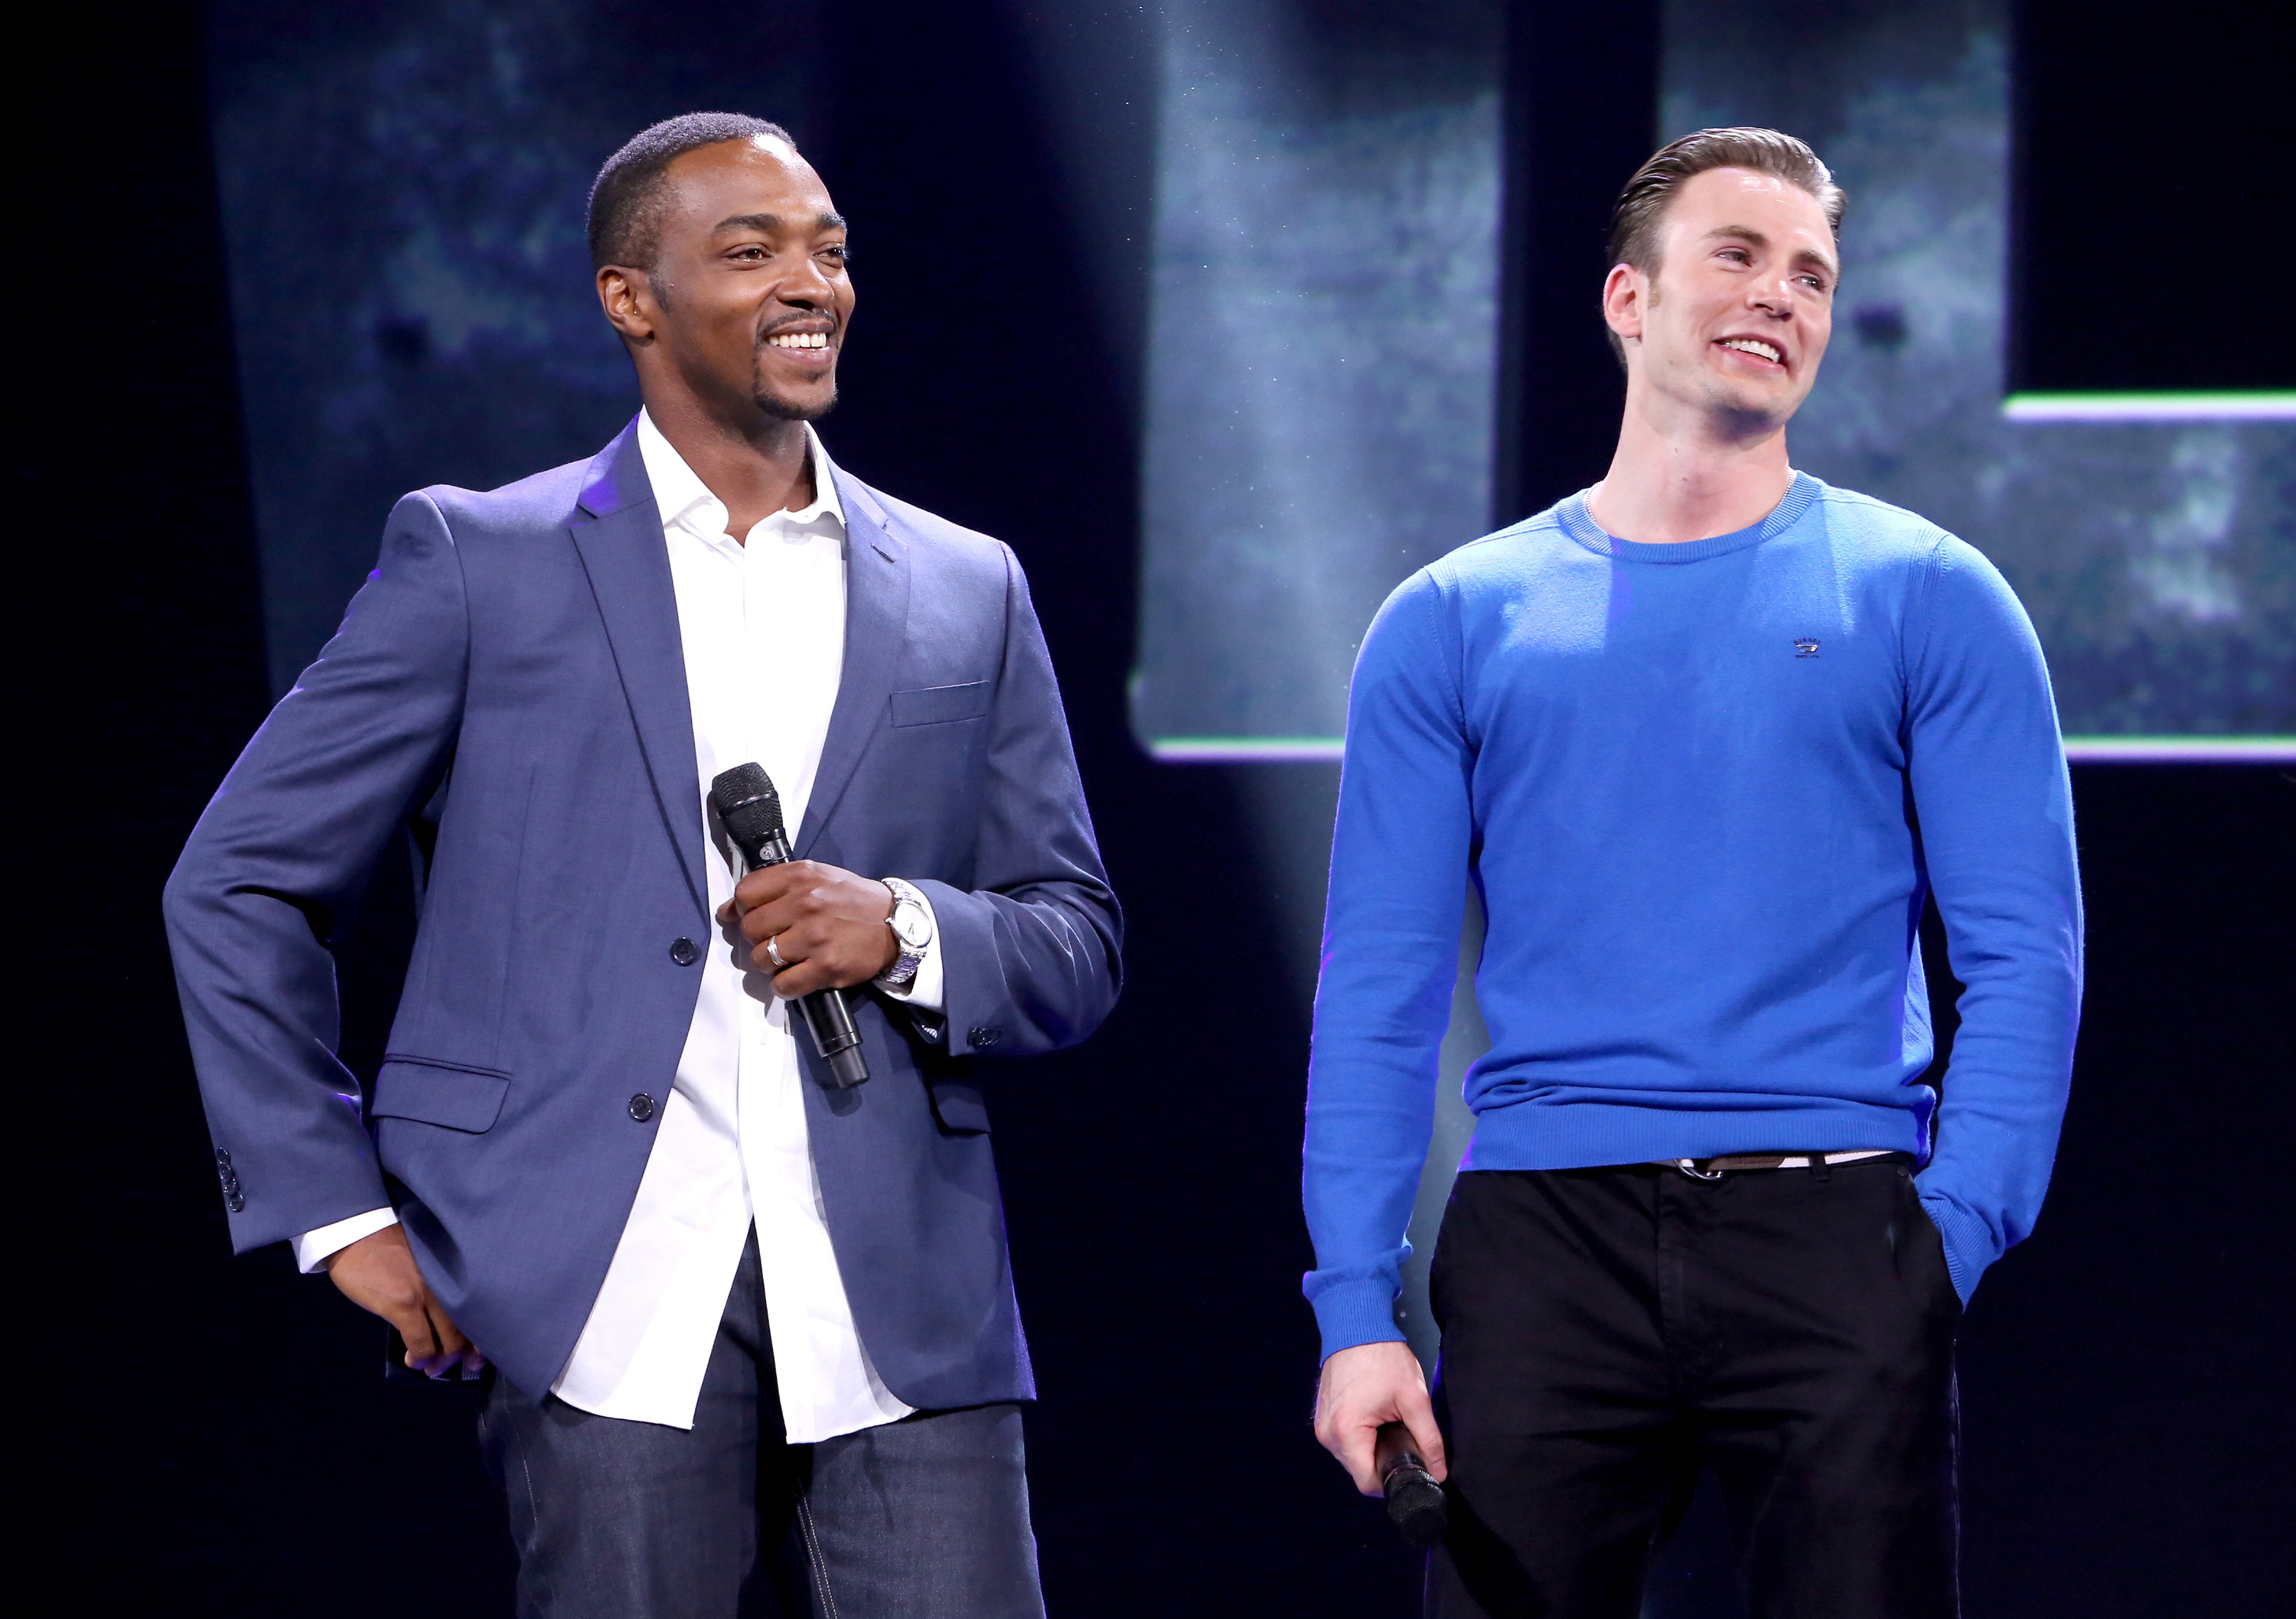 Actors Anthony Mackie, left, and Chris Evans of C<i>Captain America: Civil War</i> took part in "Worlds, Galaxies, and Universes: Live Action at The Walt Disney Studios" presentation at Disney's D23 EXPO 2015 in Anaheim, Calif., on Aug. 15, 2015. (Jesse Grant—Getty Images)